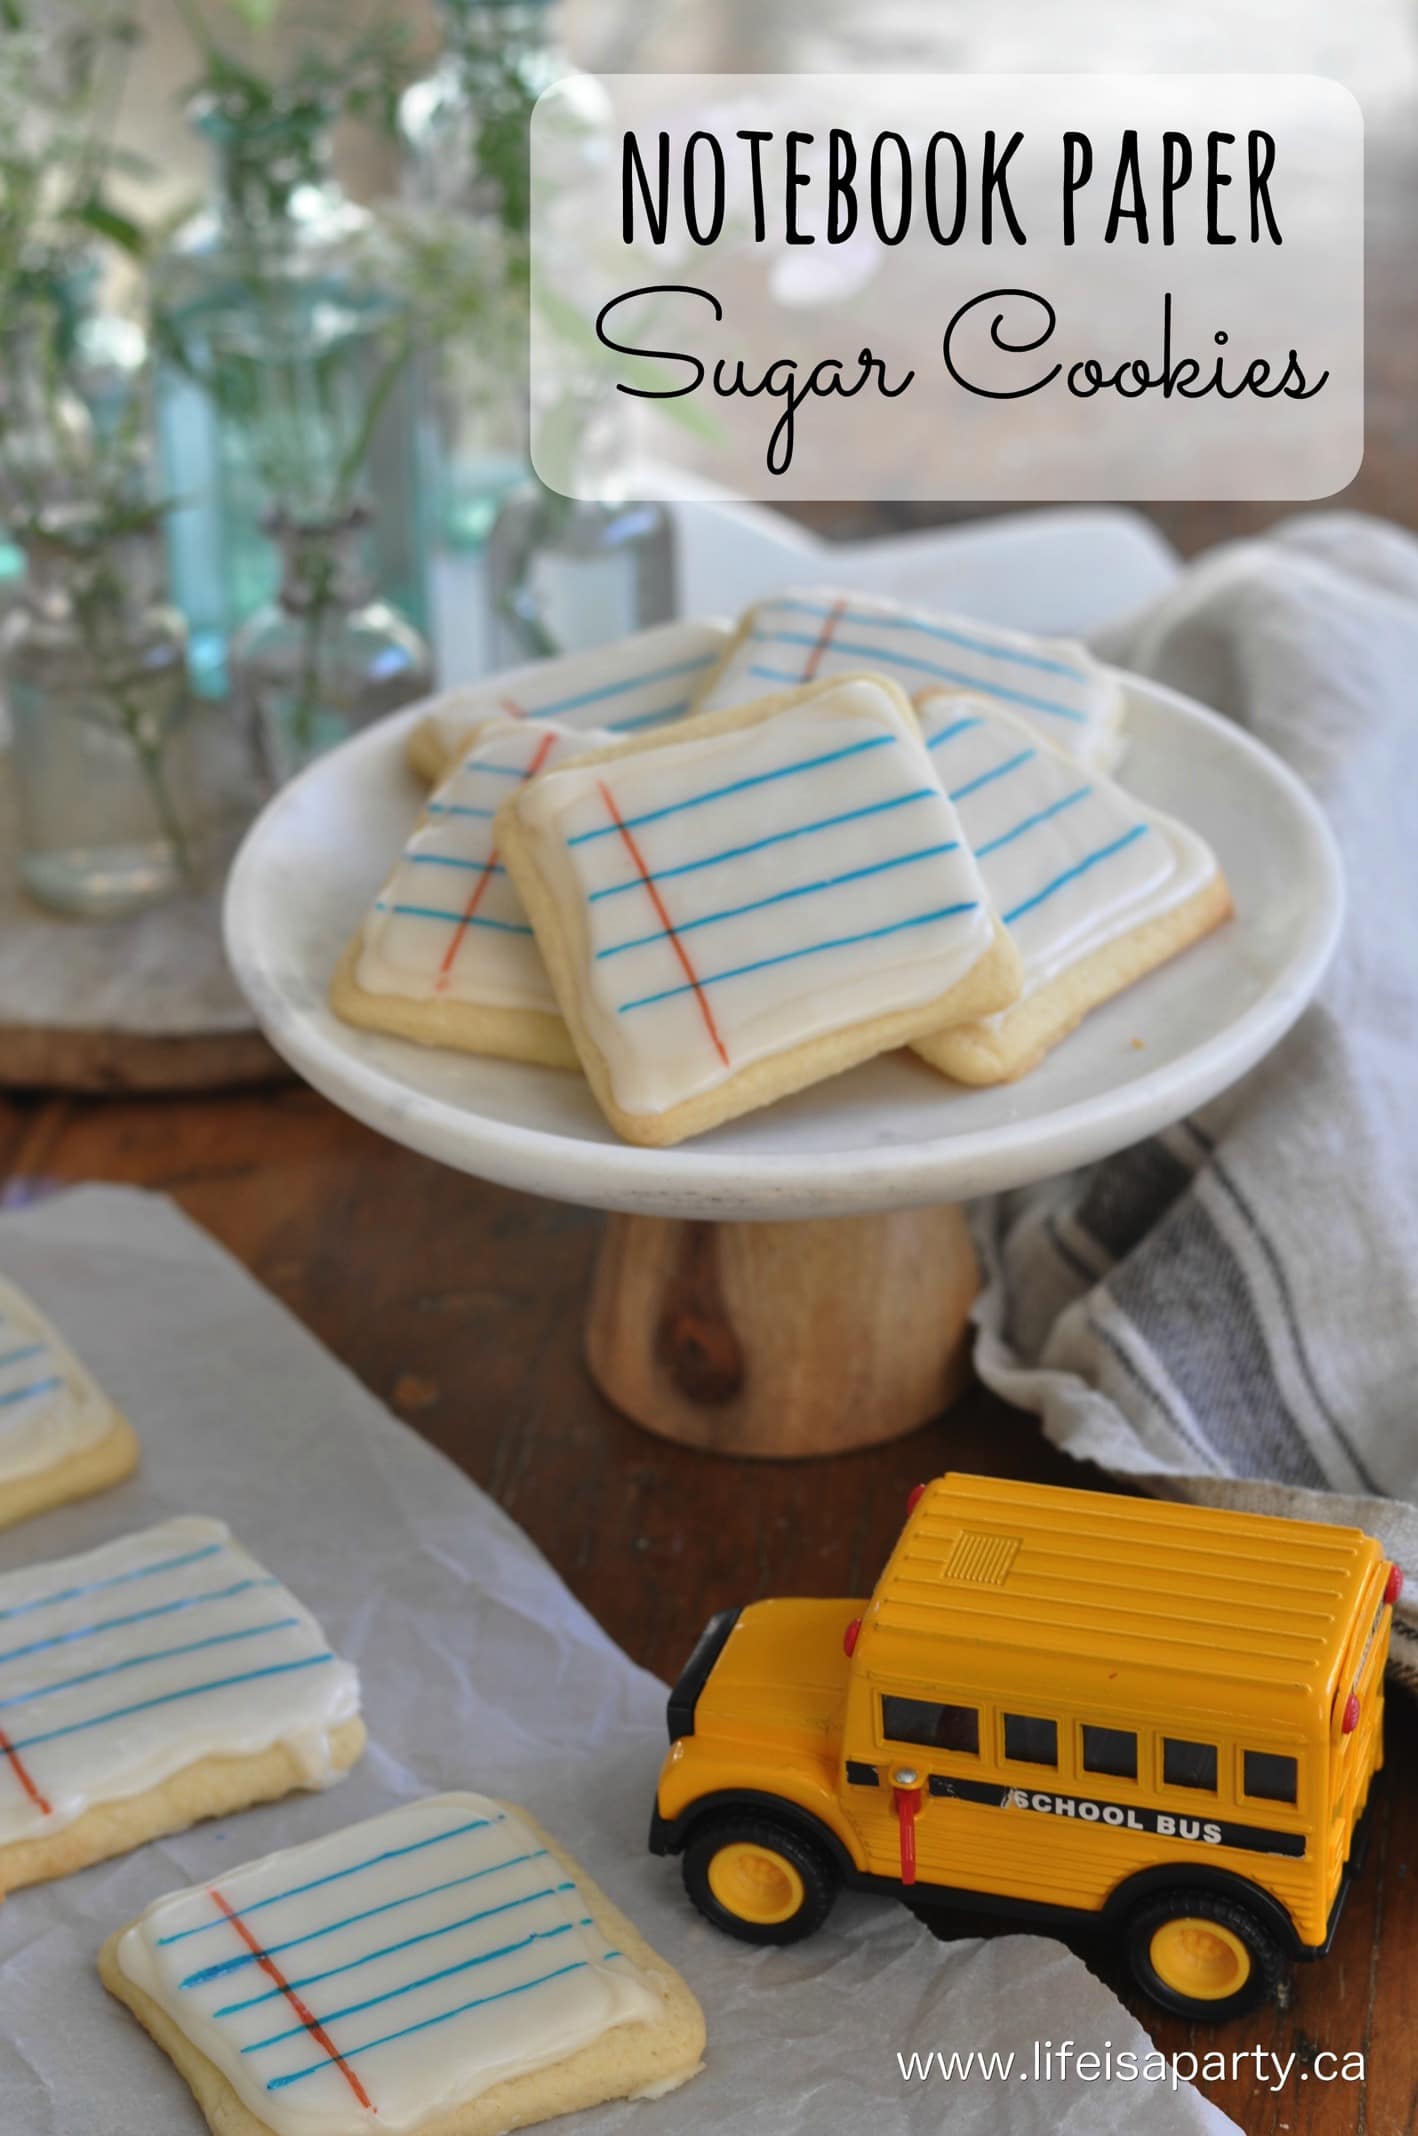 Notebook Paper Sugar Cookies for Back To School: The perfect treat to celebrate Back To School. Full instructions on how to make them.